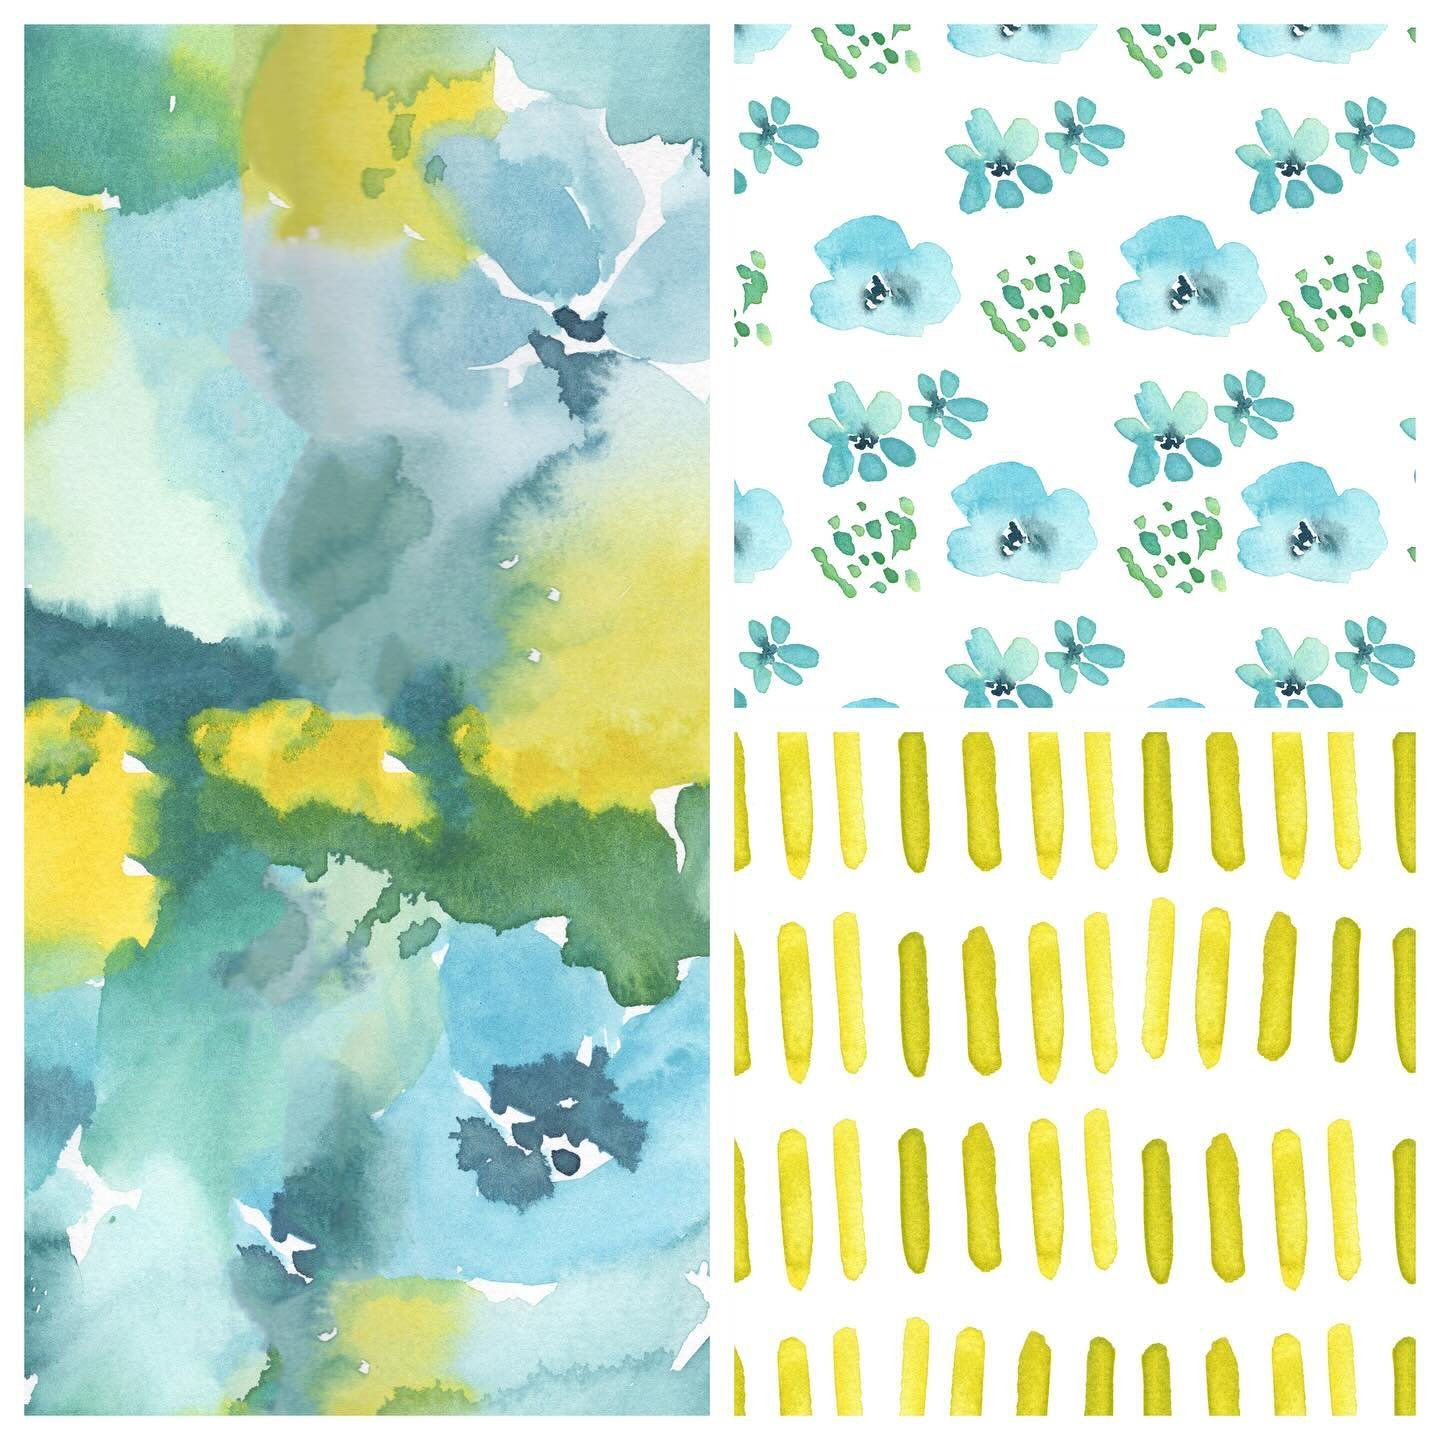 I&rsquo;m dreaming of summer with this mini pattern collection. Swipe over to see how I start most of my handmade patterns: in a watercolor sketchbook.

Where can you picture this design? I&rsquo;m thinking beautiful outdoor furniture accents.
&bull;